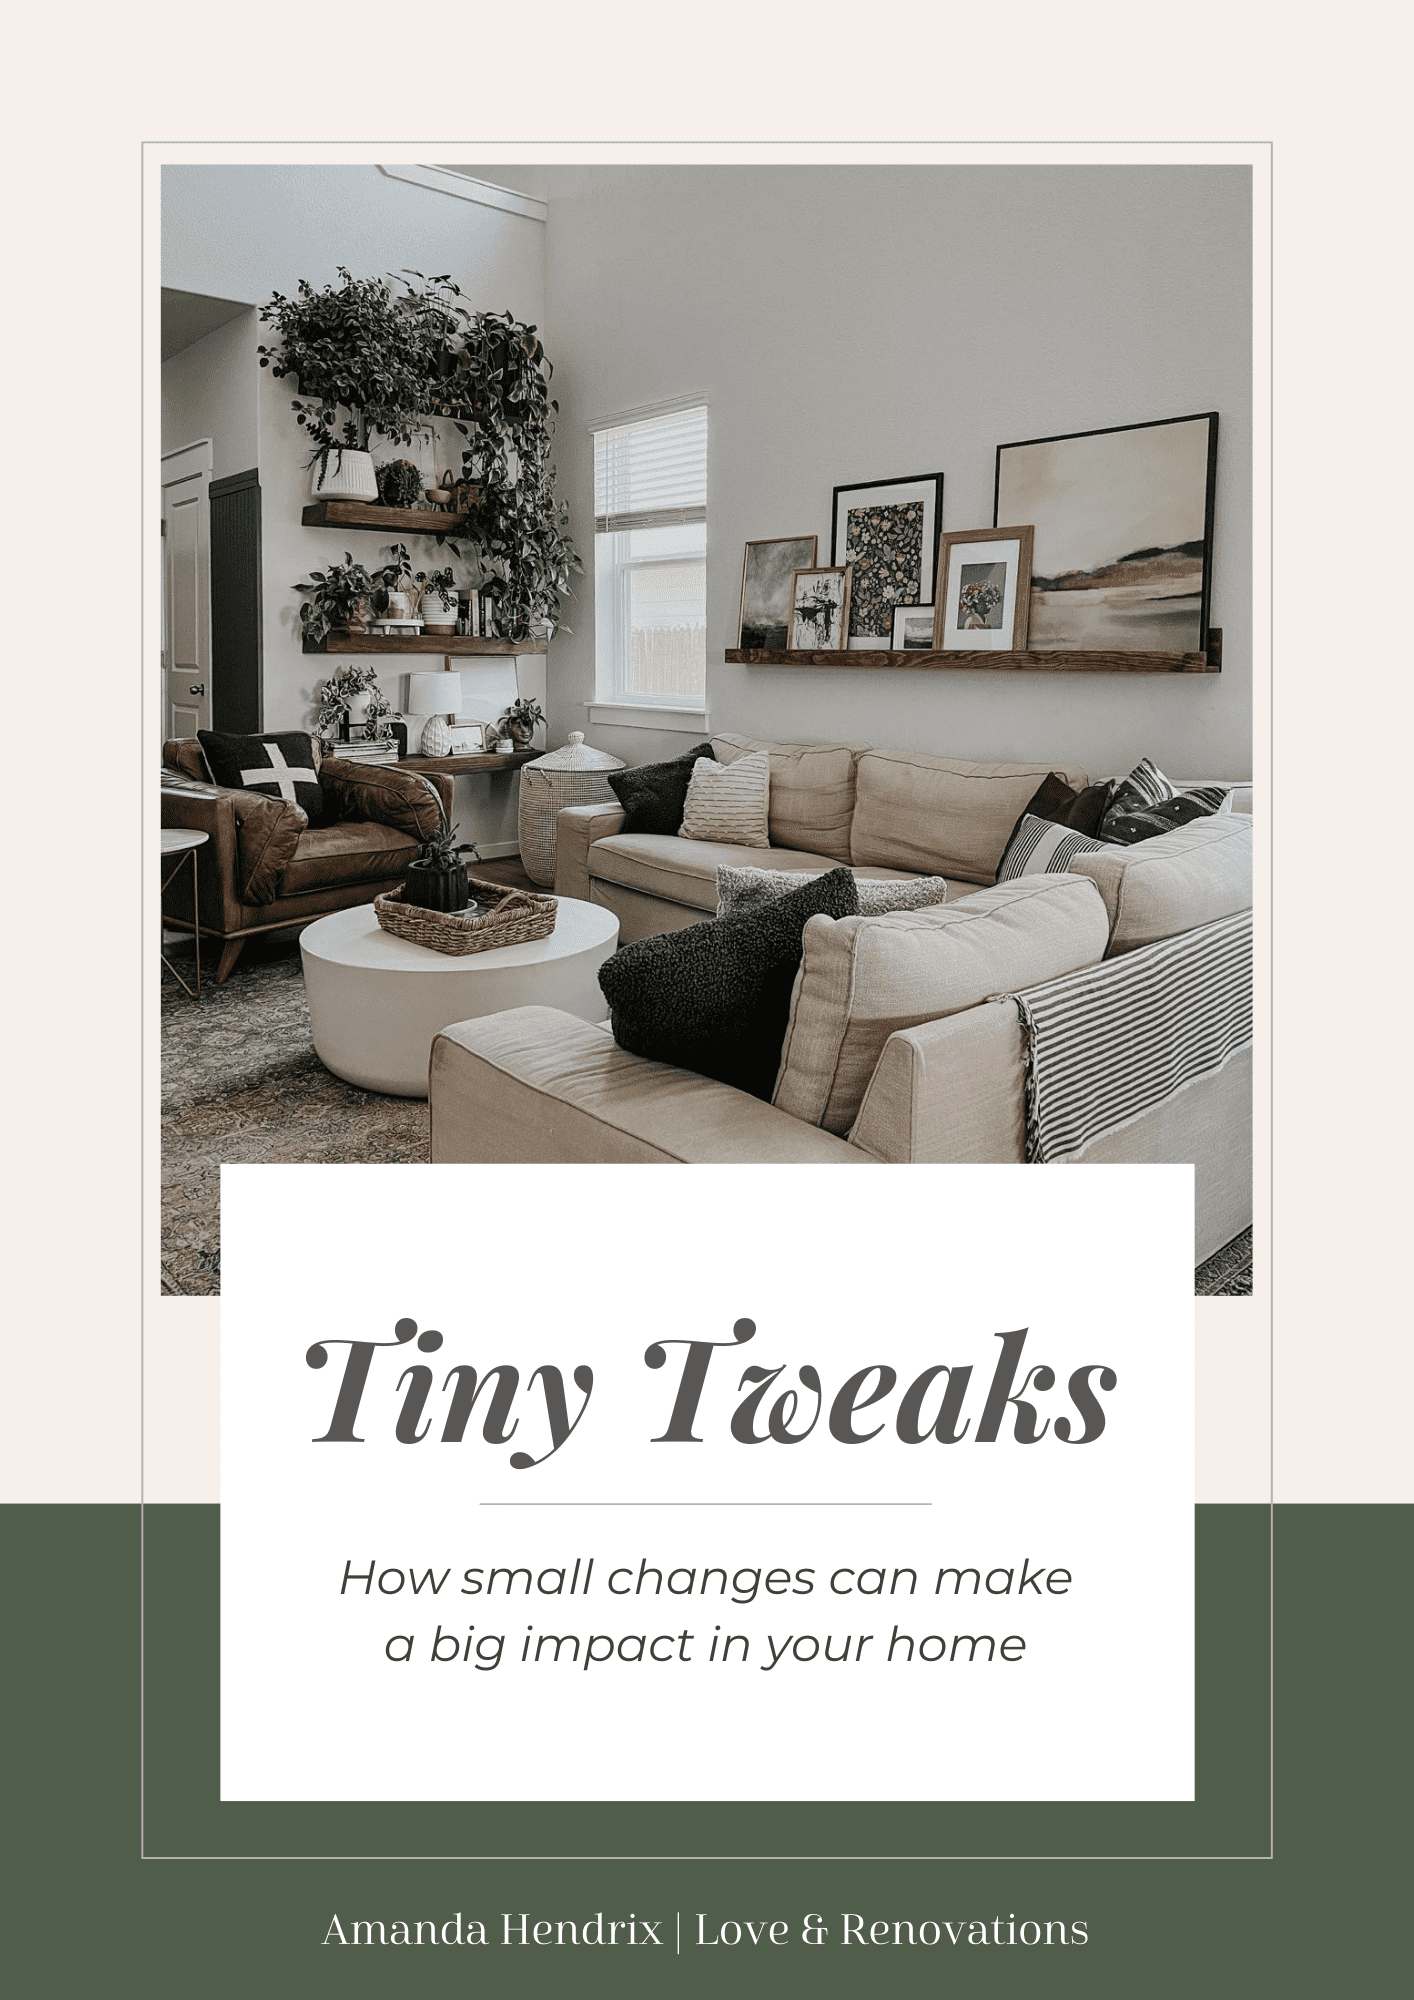 How to Find Your Style: The Tiny Tweaks Method